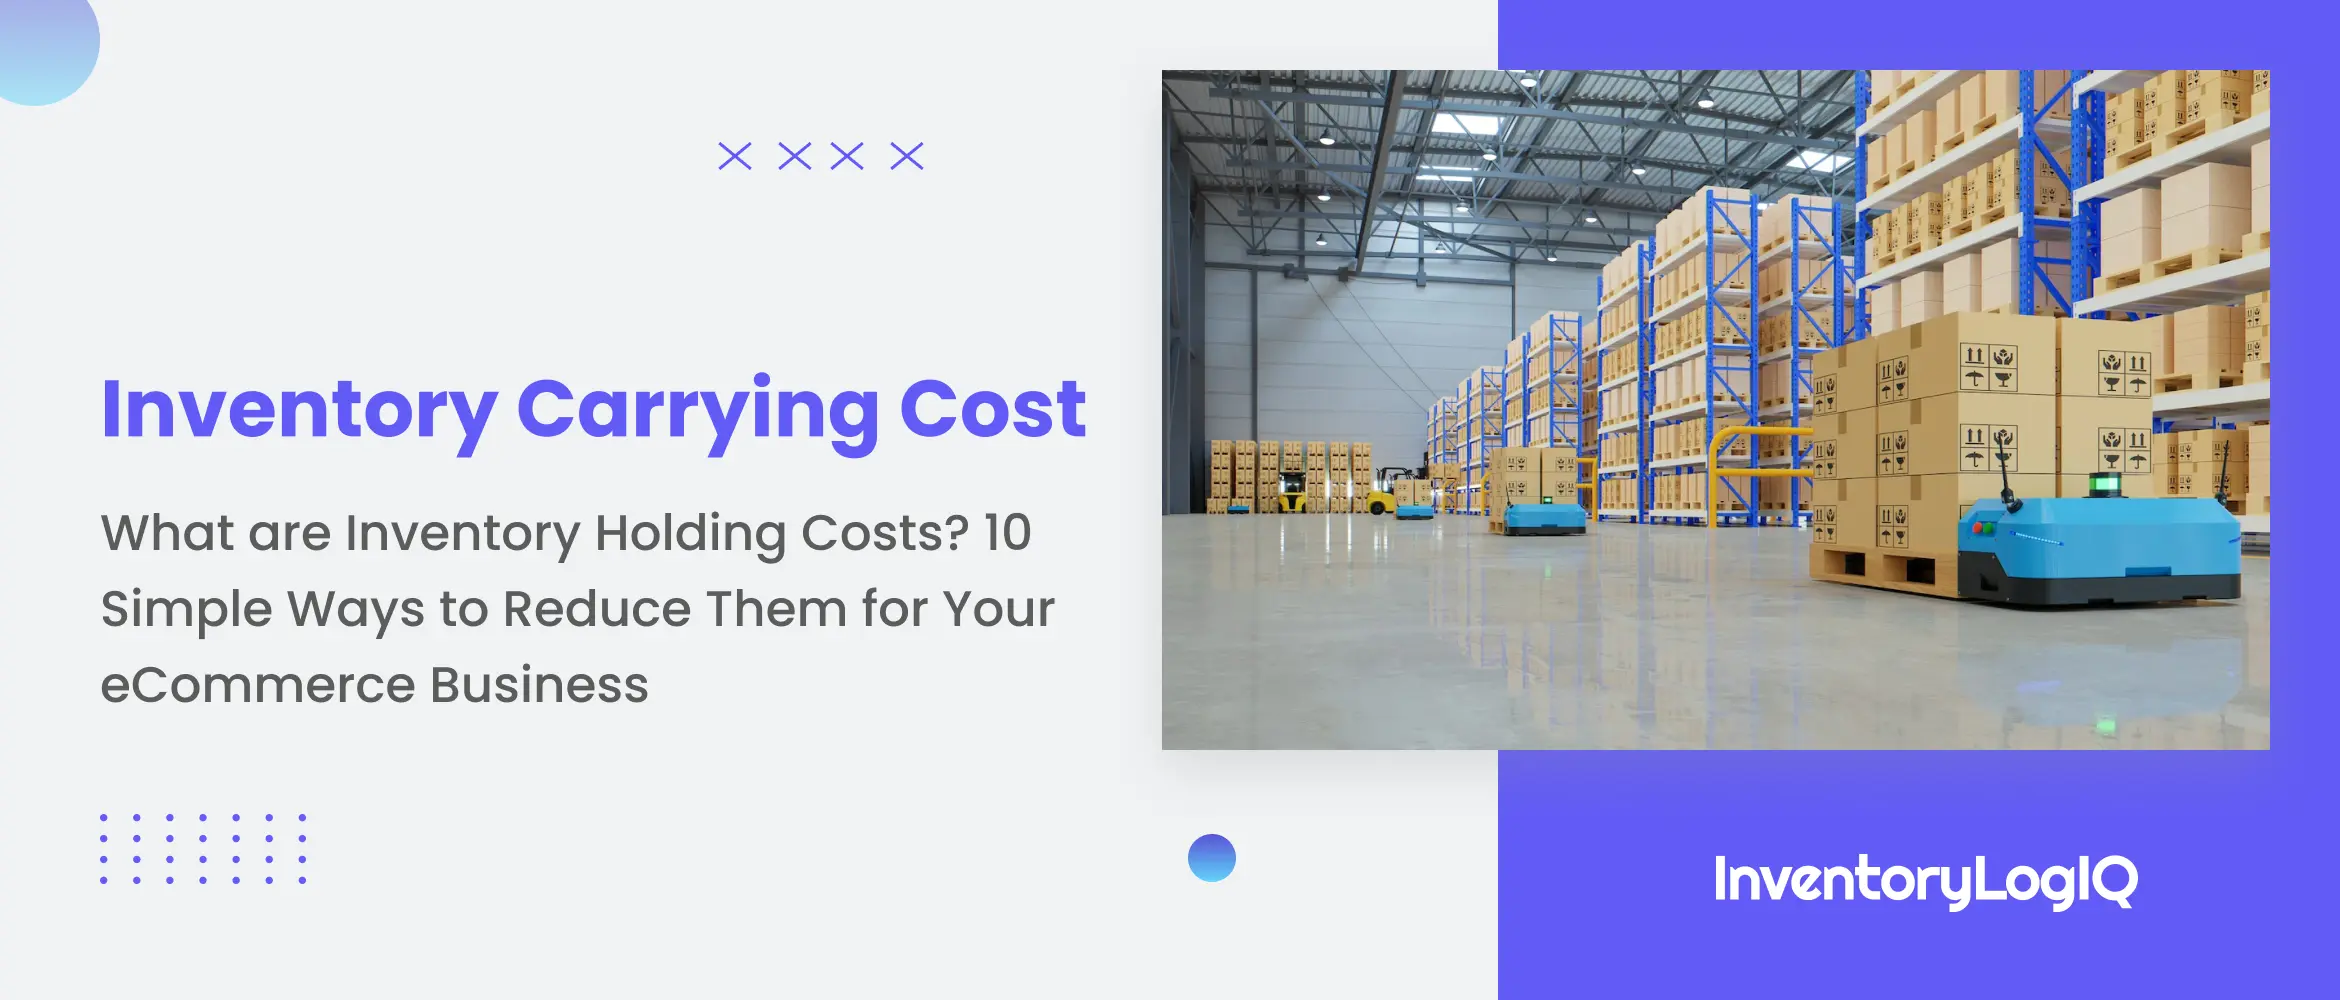 What is Inventory Carrying Cost? How To Calculate it and Save on Inventory Holding Costs in 2023?